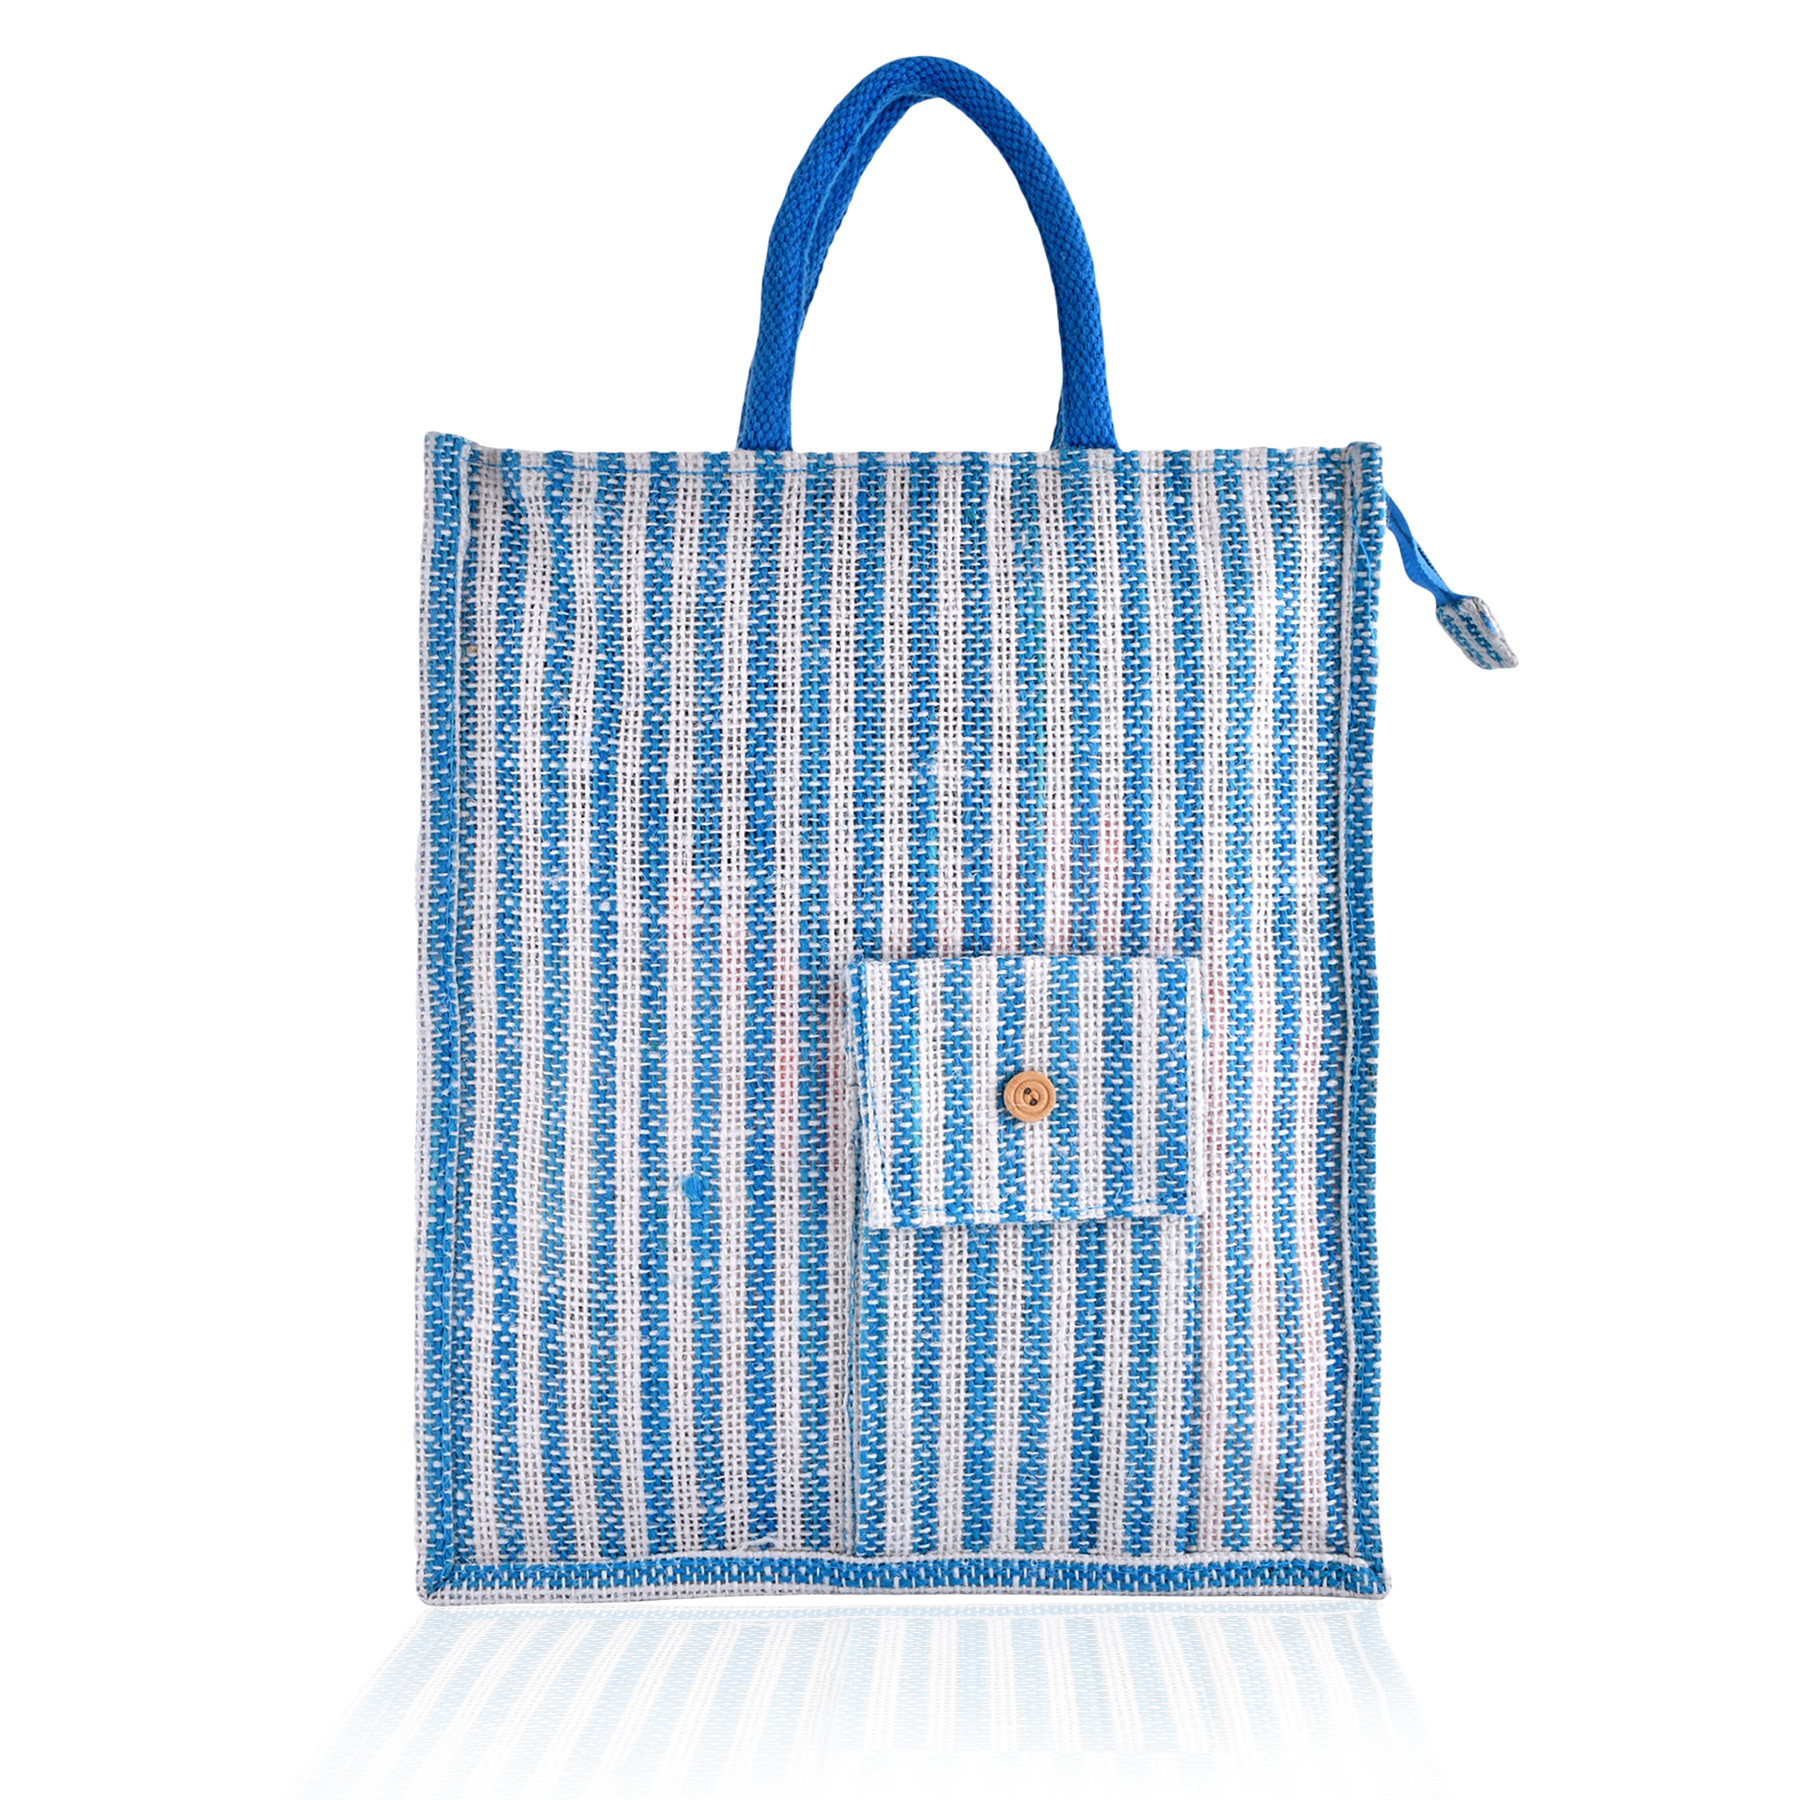 Kuber Industries Shopping Bag | Jute Carry Bag | Zipper Grocery Bag with Handle | Reusable Shopping Bag | Carrying Bag With Front Pocket | Lining-Grocery Bag | Medium | Blue